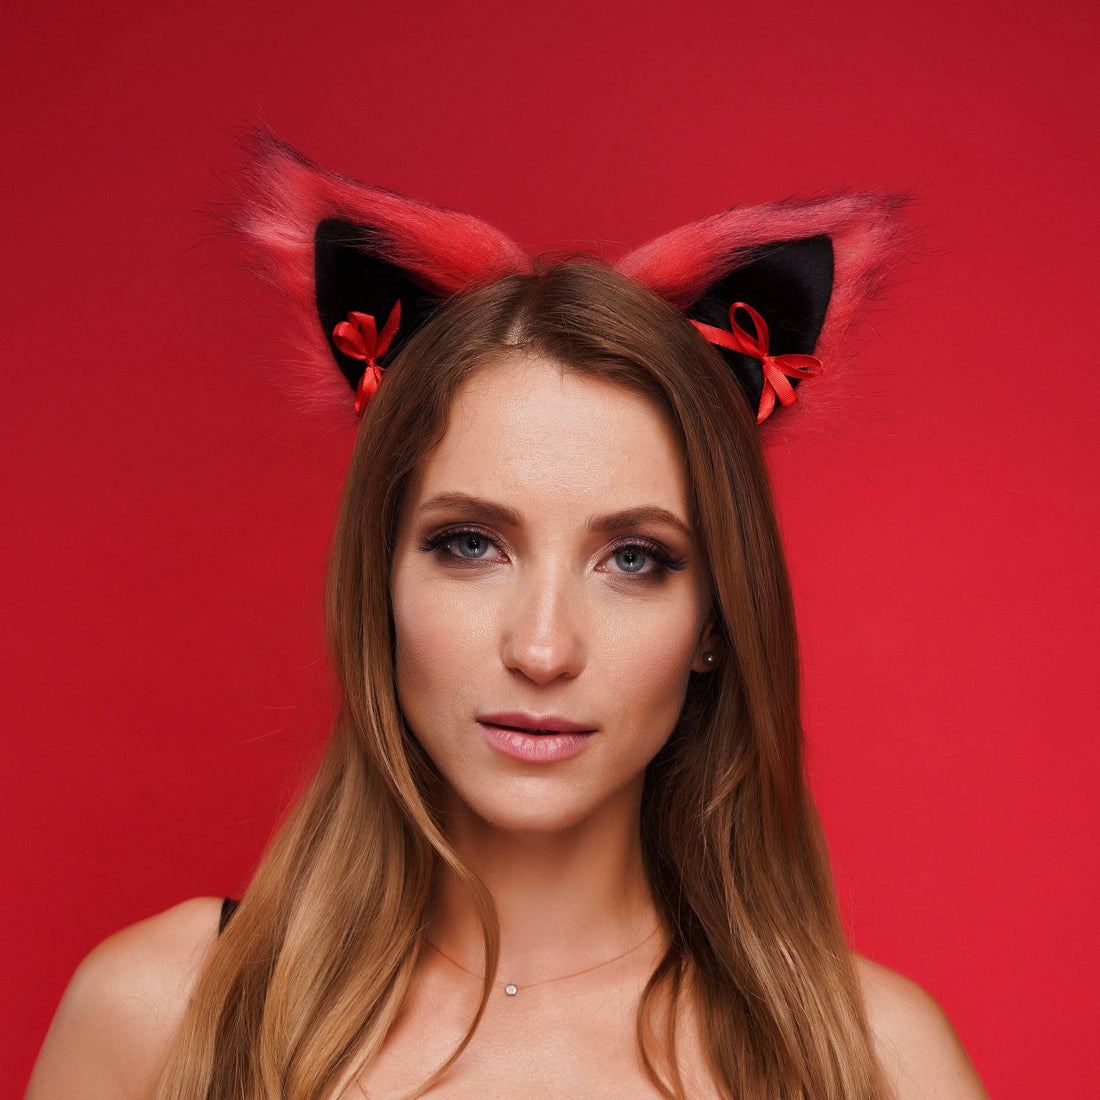 Kitten ears red with black tip and red ribbons - OKOVA